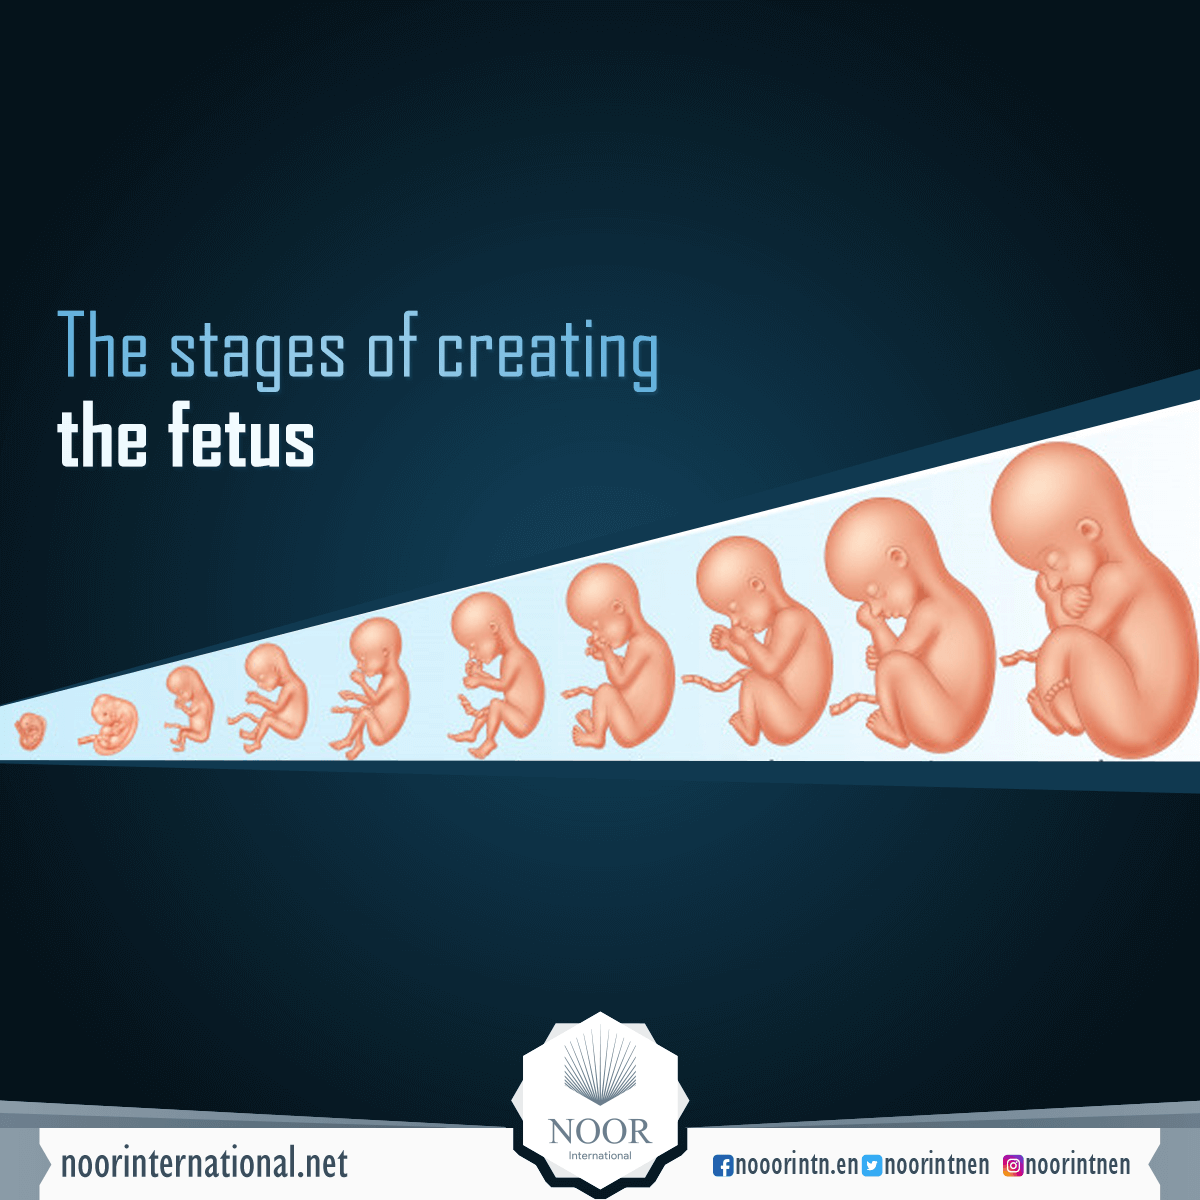 The stages of creating the fetus